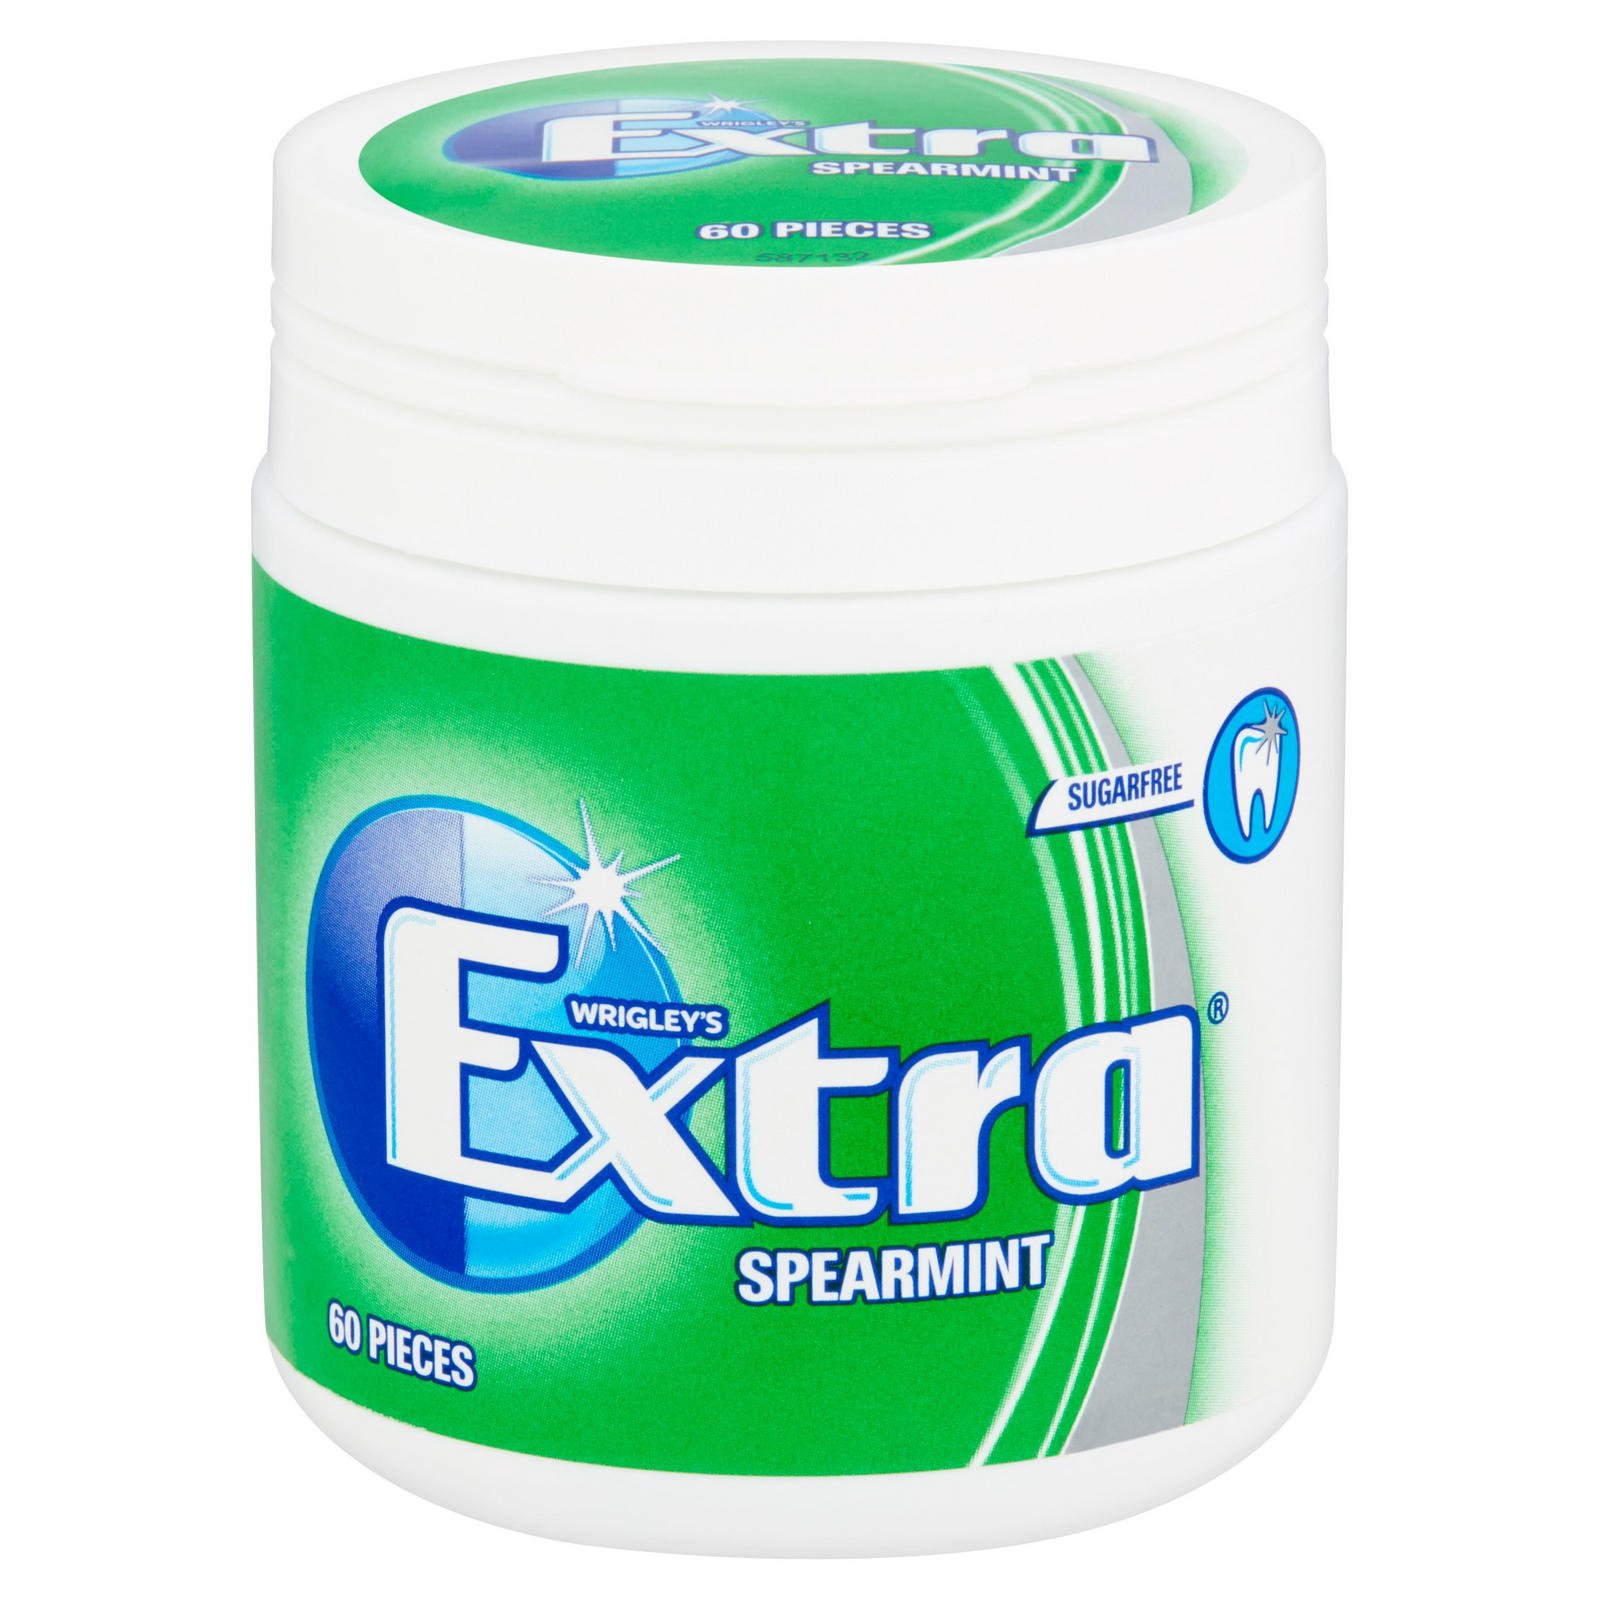 Extra Spearmint Chewing Gum Sugar Free Bottle 60 Pieces